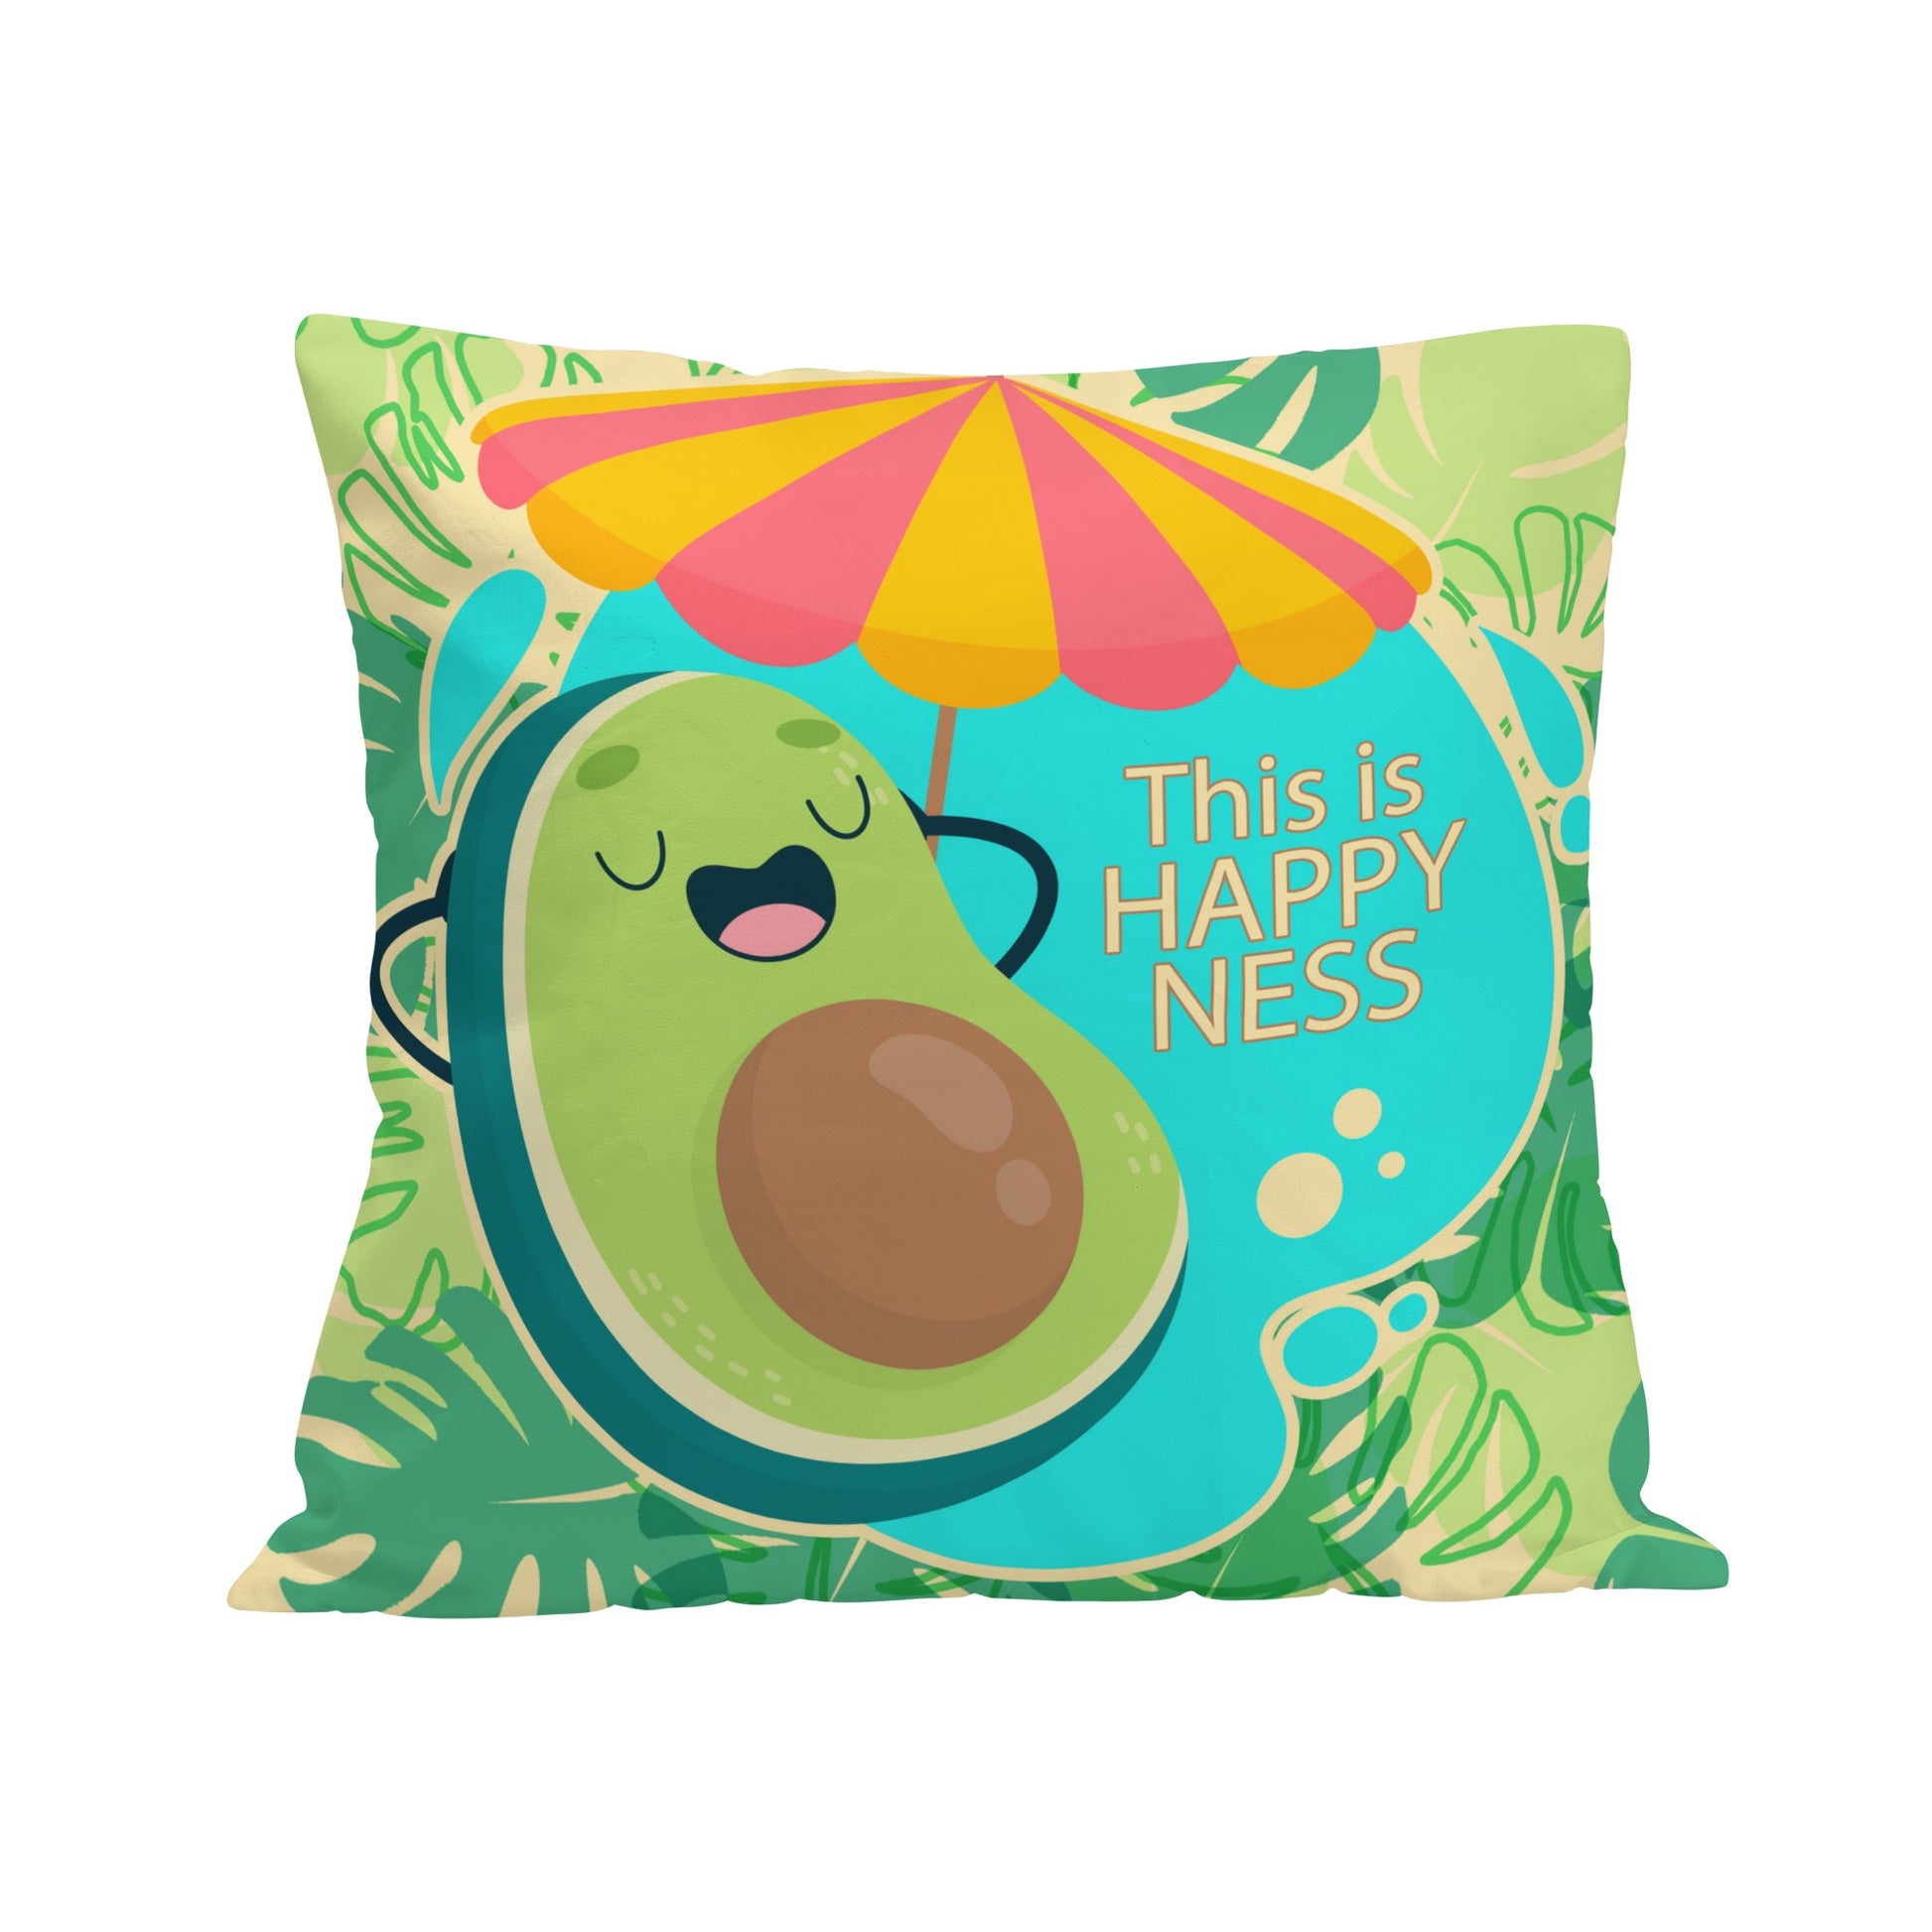 Elevate your space with the vibrant, tasty, and oh-so-cushy vibes of the Avocado Happiness Pillow Cover! Whether you're looking to add a pop of color to your couch or a dollop of fun to your bedding situation, this pillow cover packs just the right amount of "YUM!" to chic-ify your room!